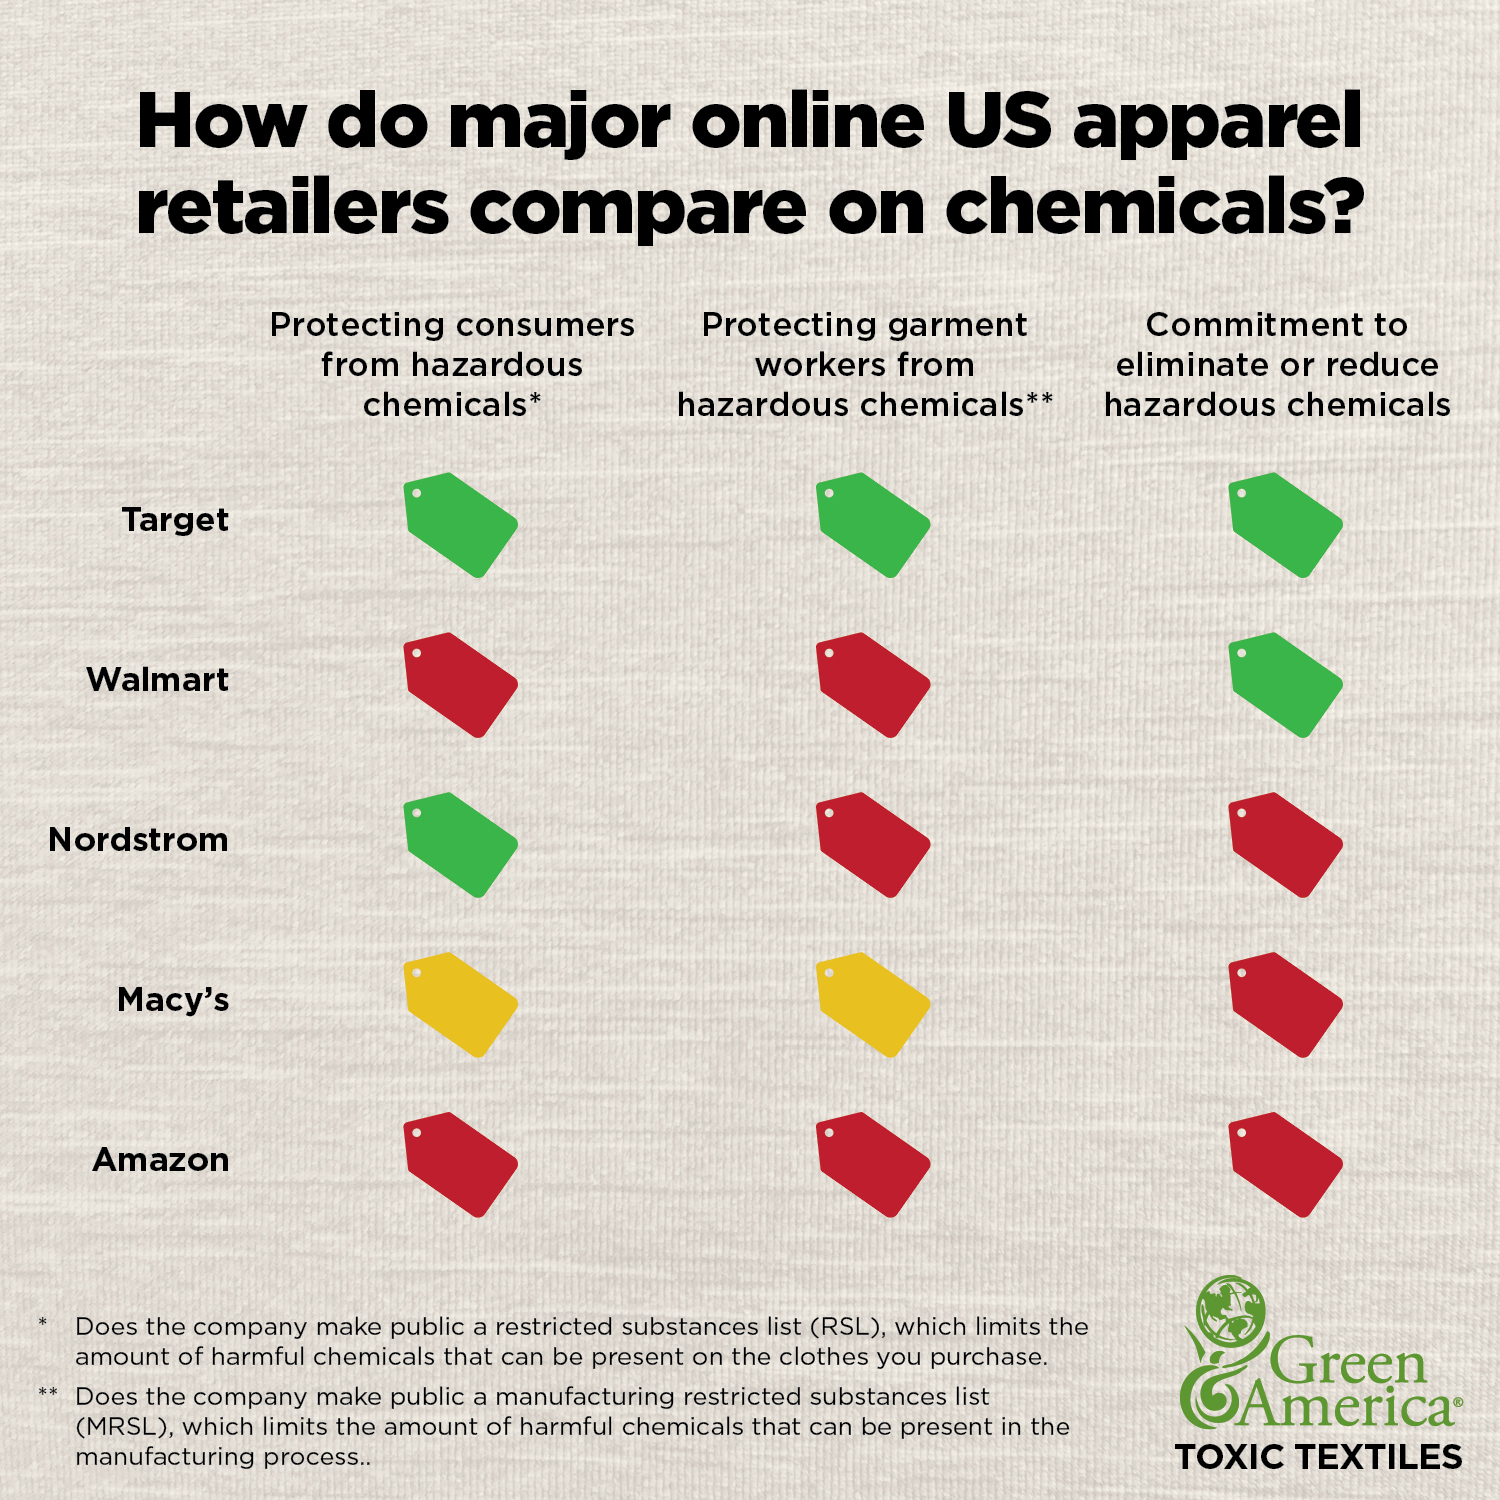 How to major online US apparel retailers compare on chemicals?